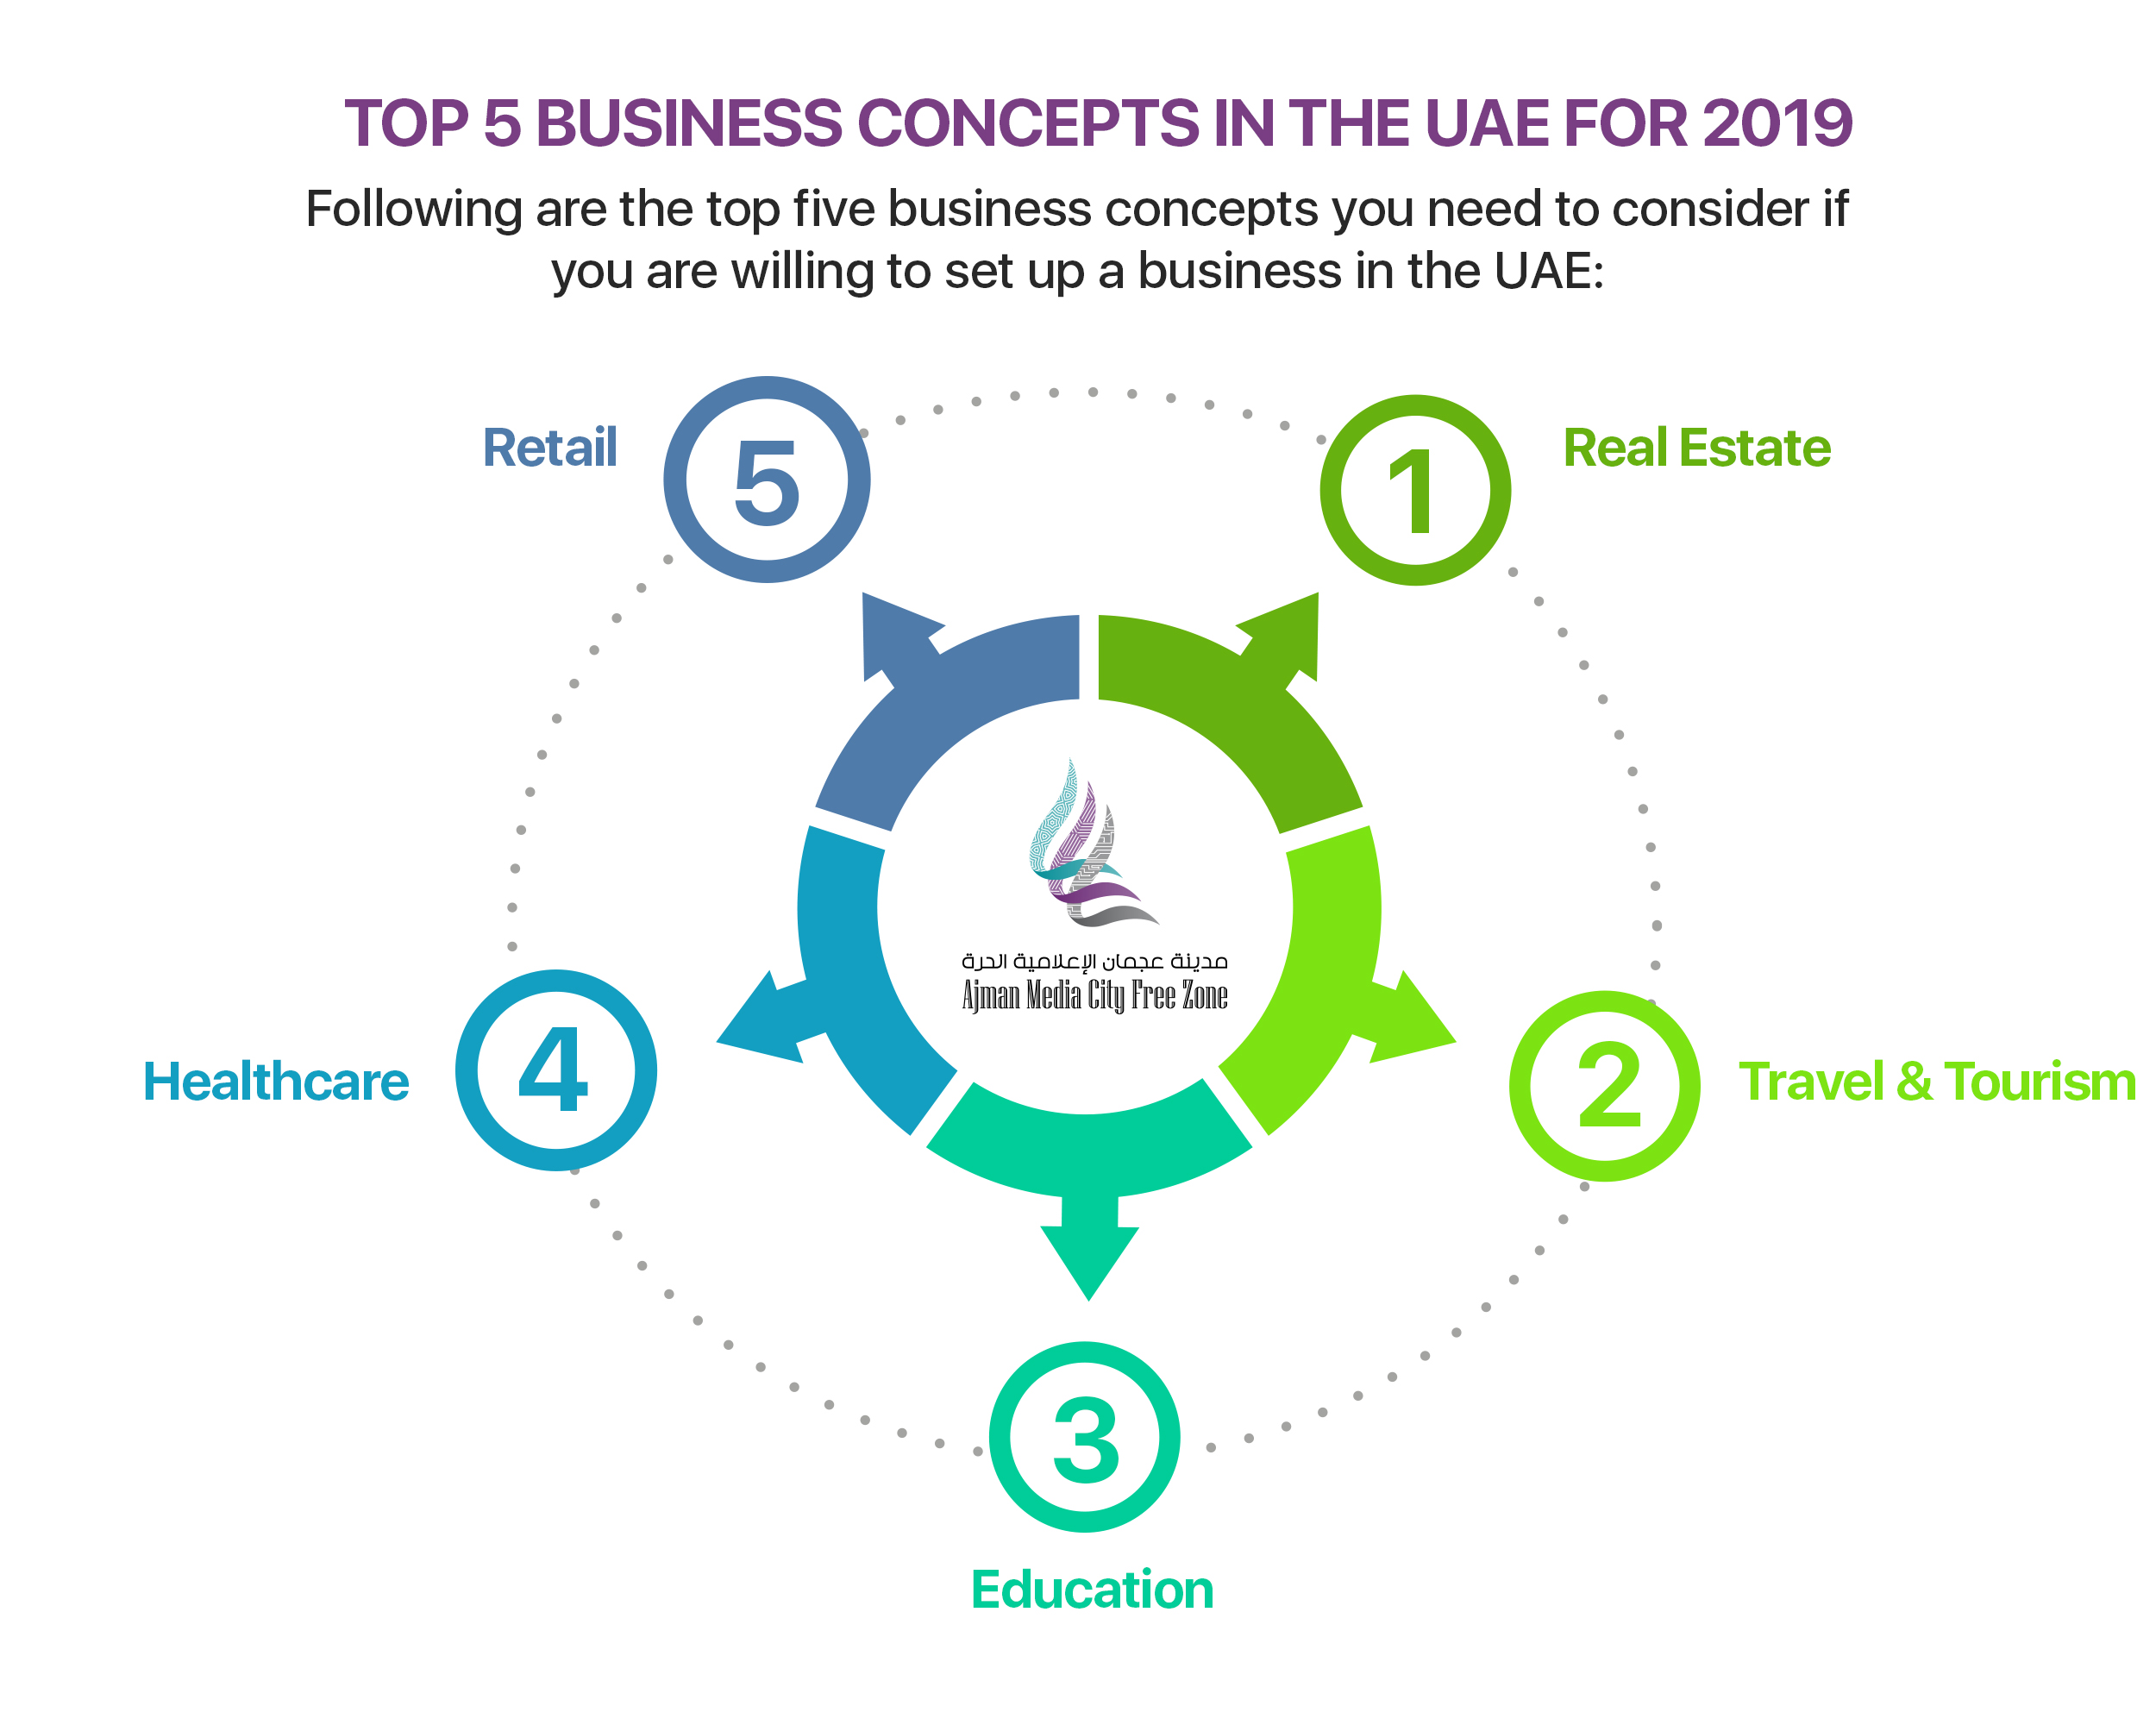 Top 5 Business Concepts in the UAE for 2019